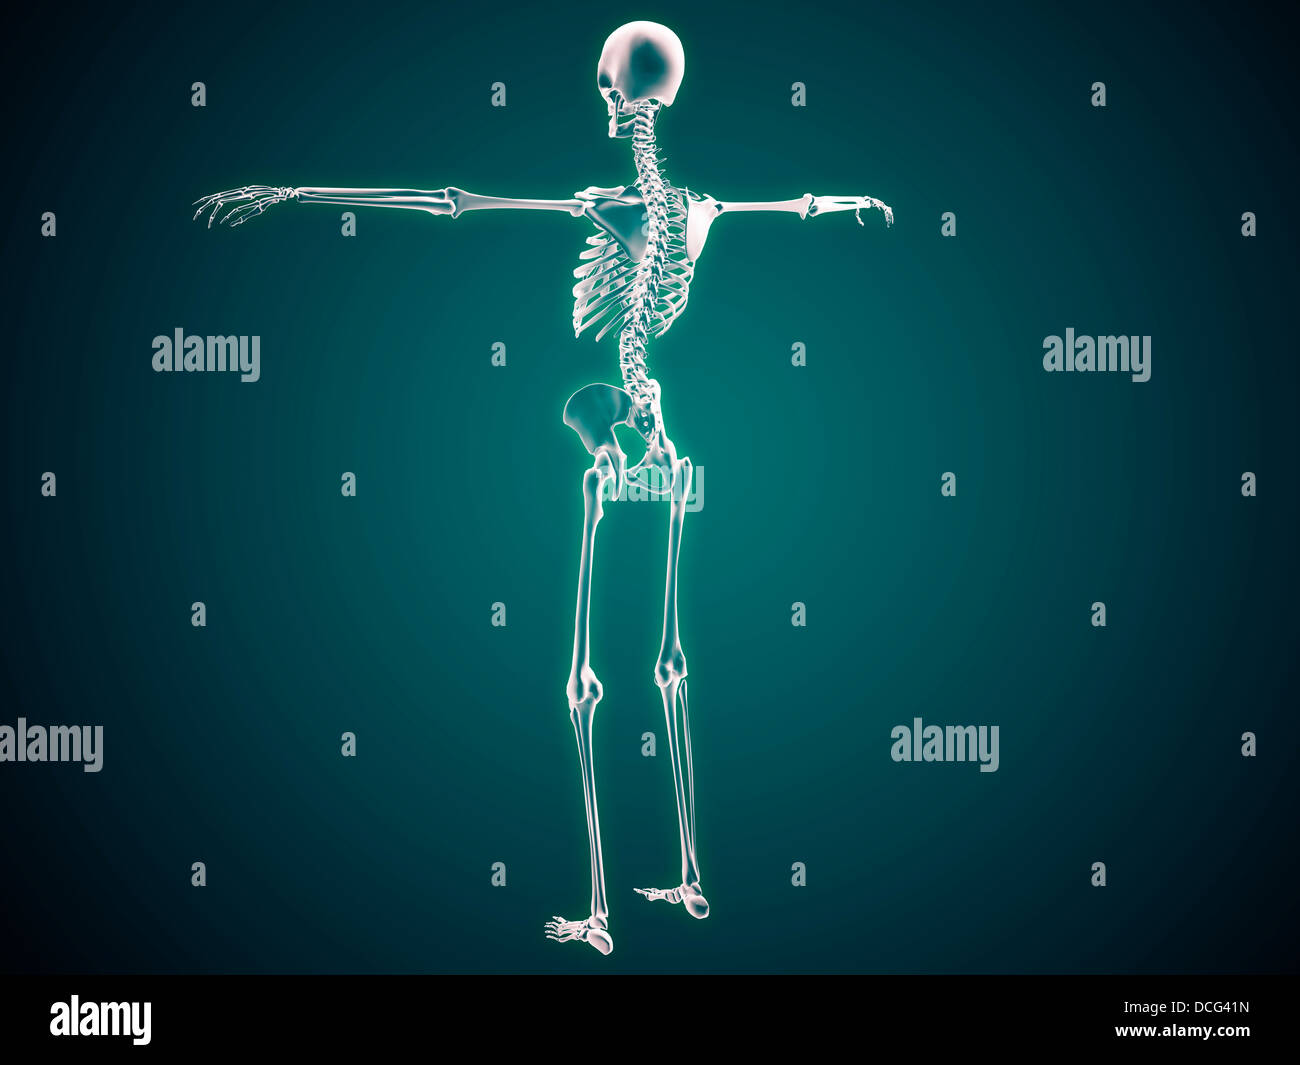 Conceptual image of human skeletal system. Stock Photo